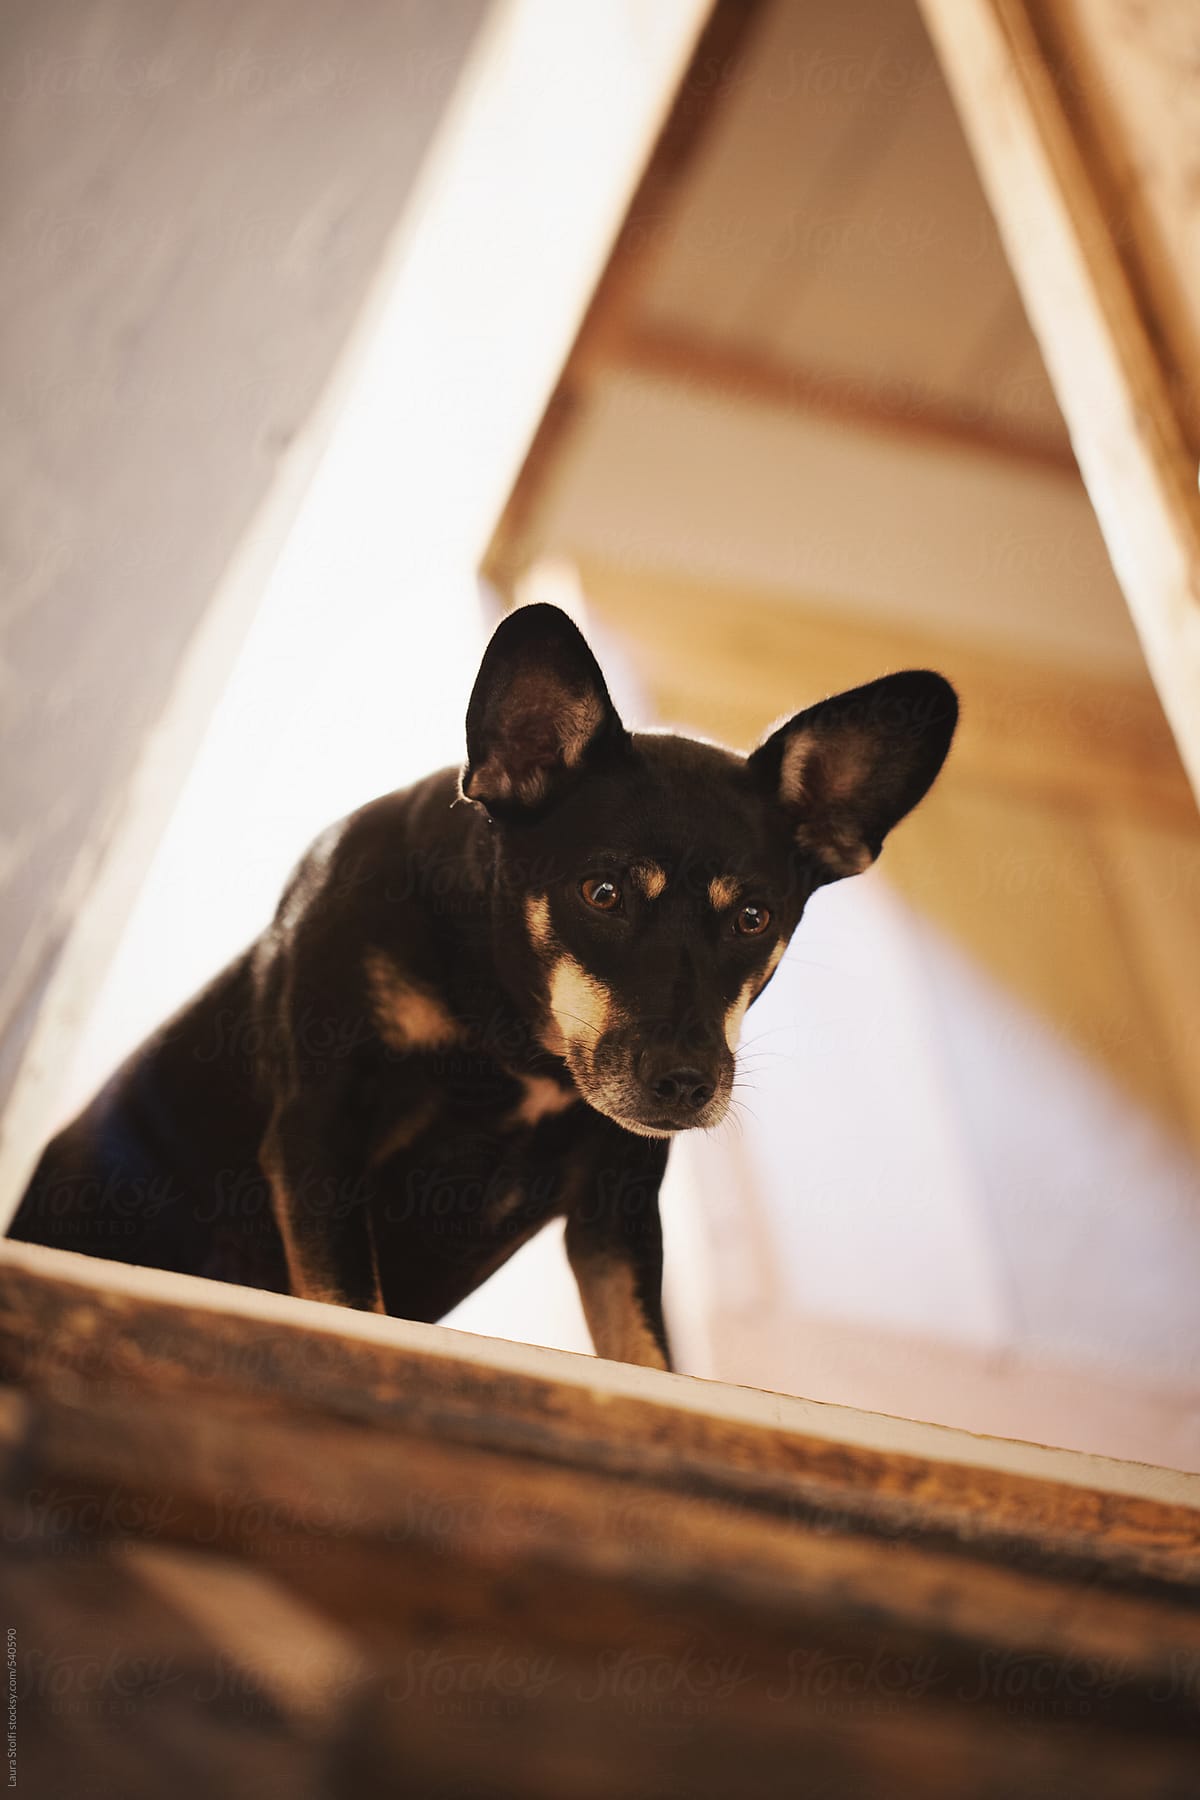 Dog stands on top of wooden stairs and looks down